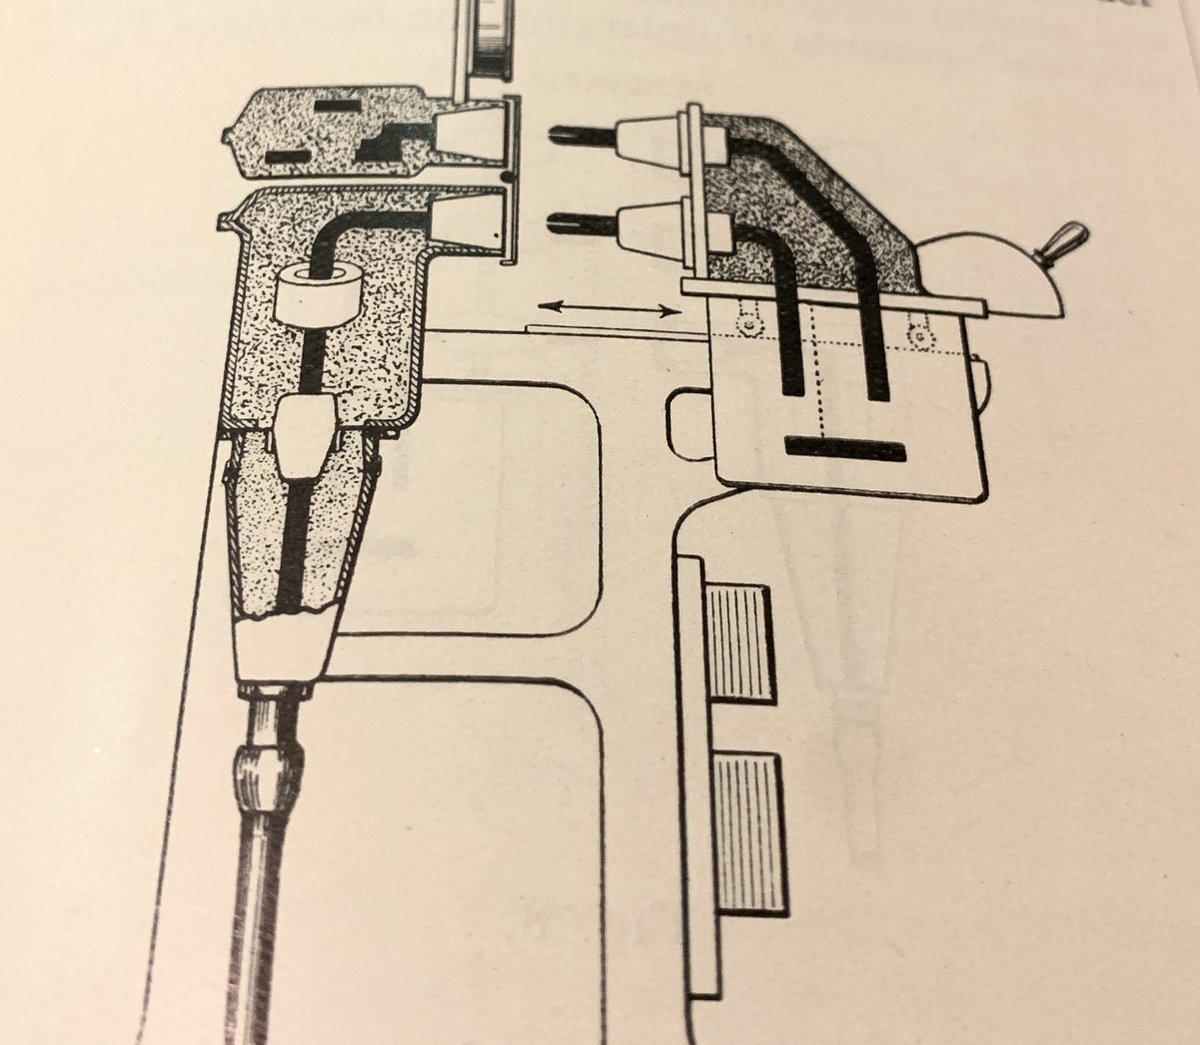 This cut away shows the basic horizontal drawout, horizontal isolation concept. We use the phase “rack in” due to the rack and pinion design Reyrolle adopted to isolate the OCB from the spouts. Elegant and simple  [20/26]